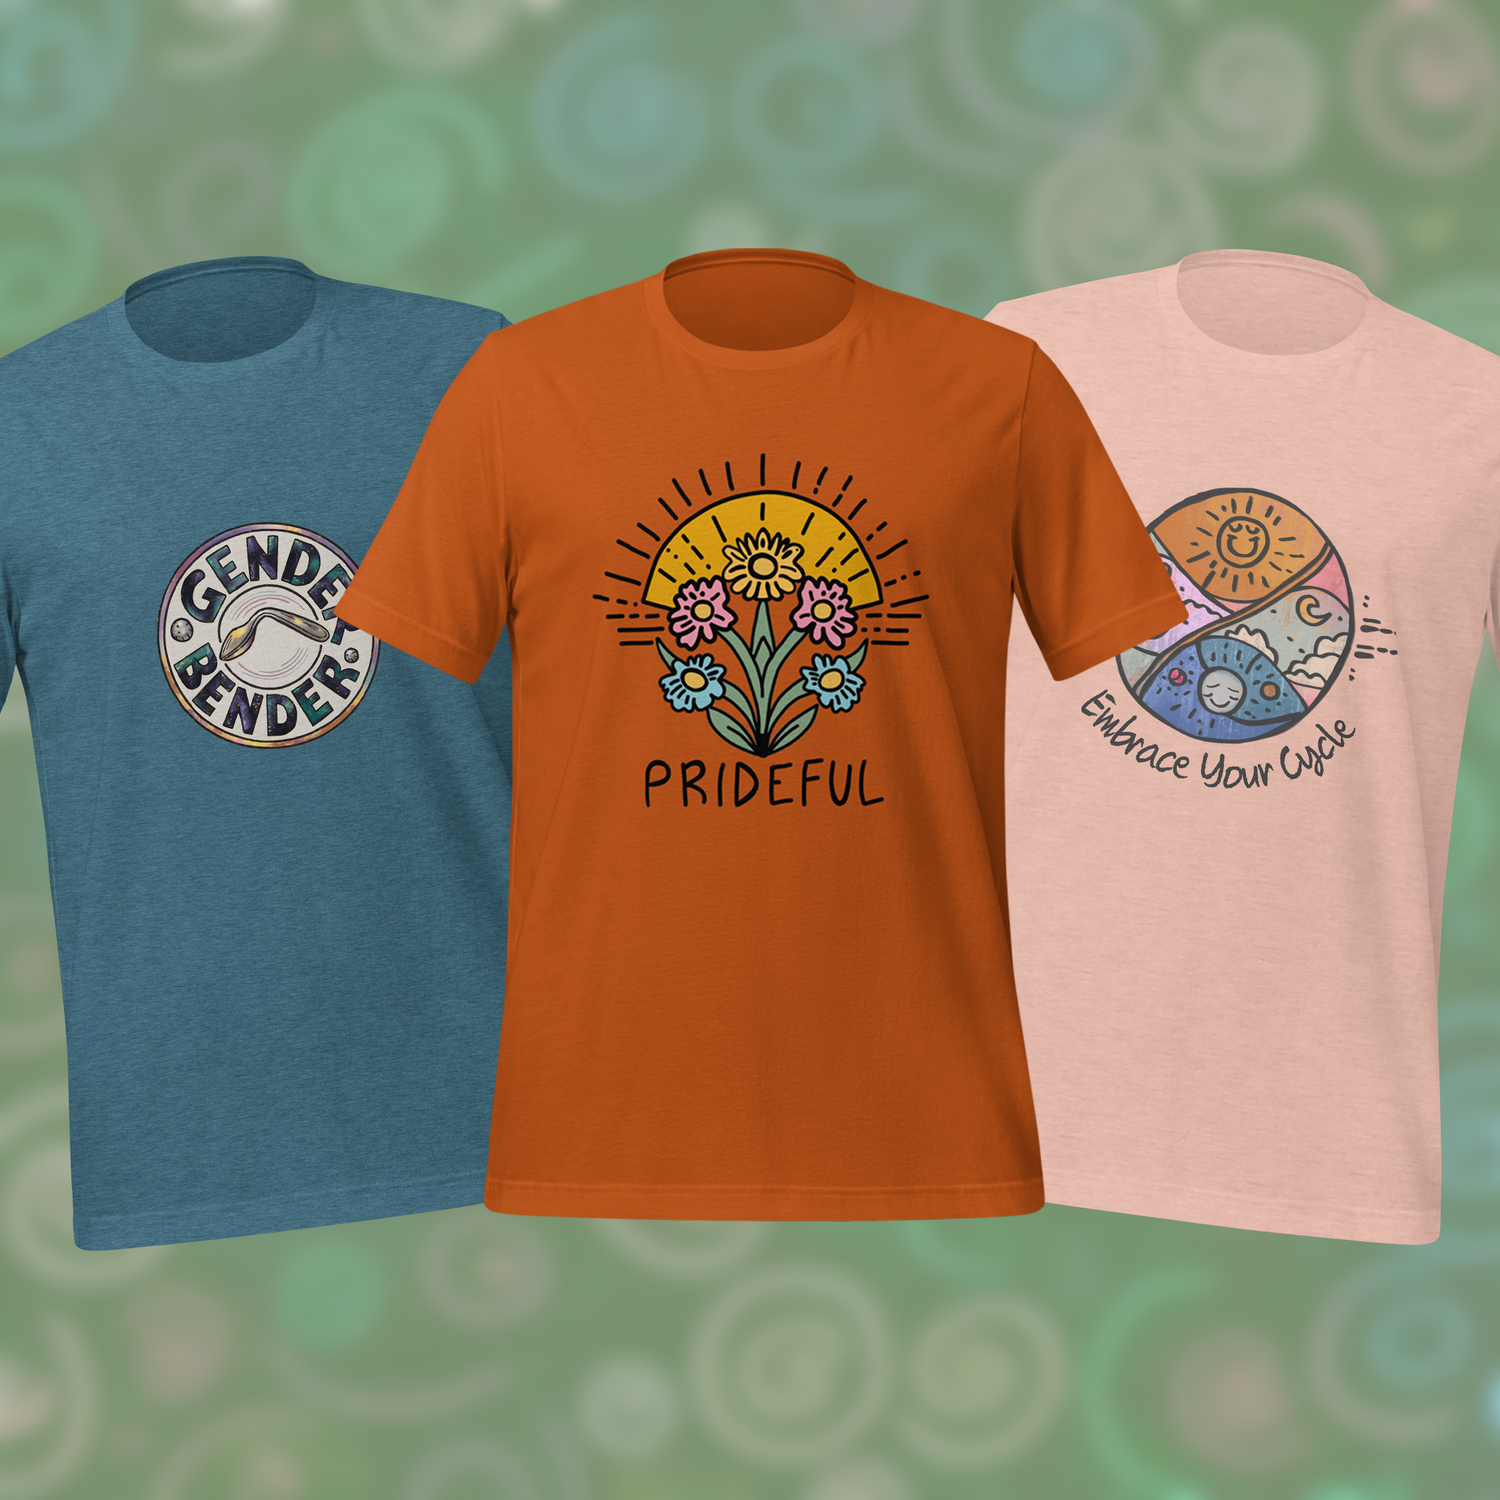  Three t-shirts in blue, red, and pink colors with mindful designs, displayed against a swirly green background.